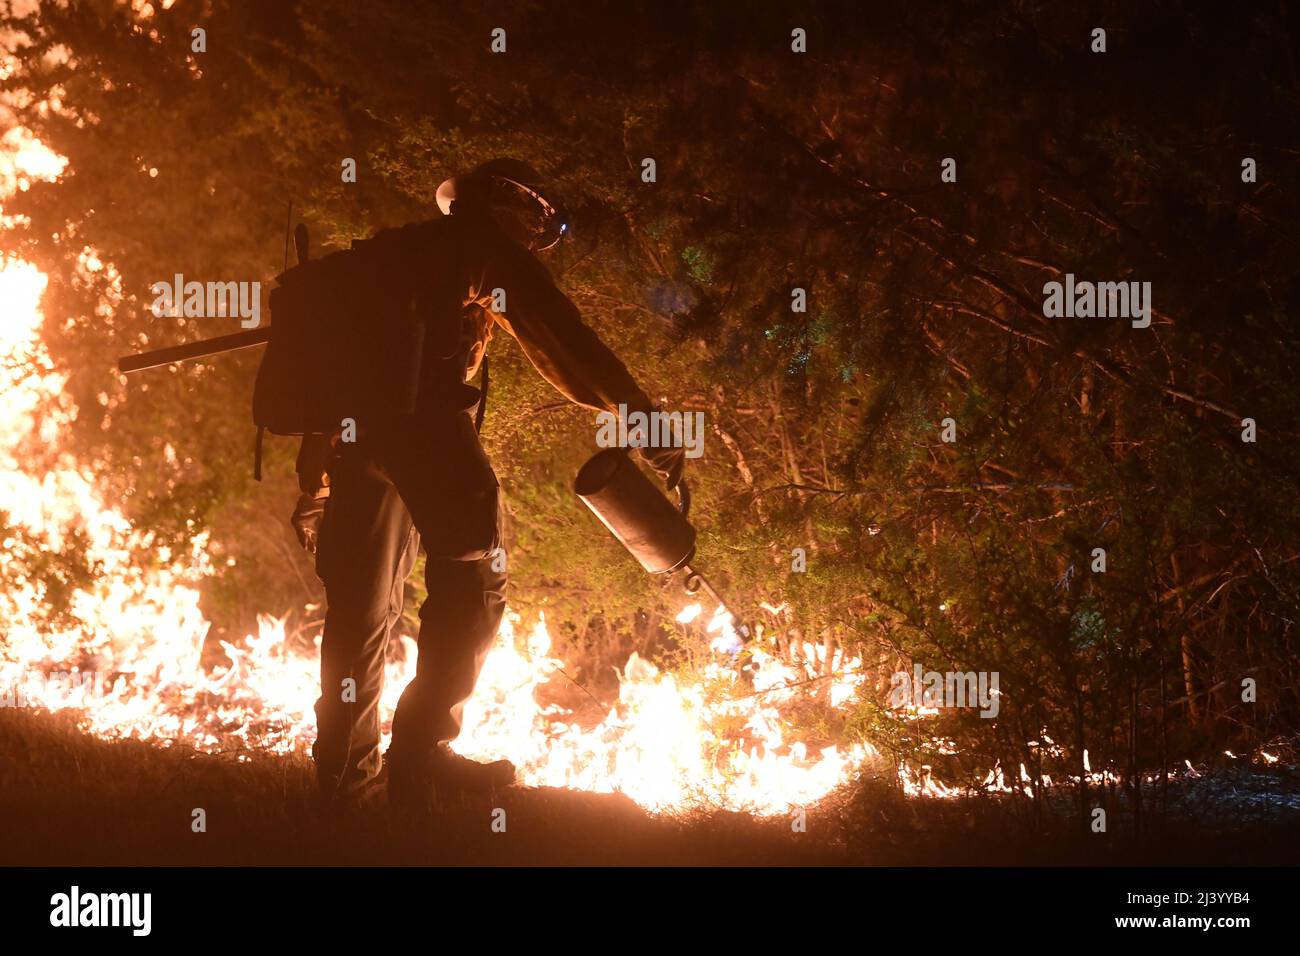 Francisco Lugo Texas State Forrest Service Fredricksburg Task Force Strike Team Firefighter Does A Controlled Burn Out To Manage The Area Of A Large Wildfire Apr 9 22 At Joint Base San Antonio